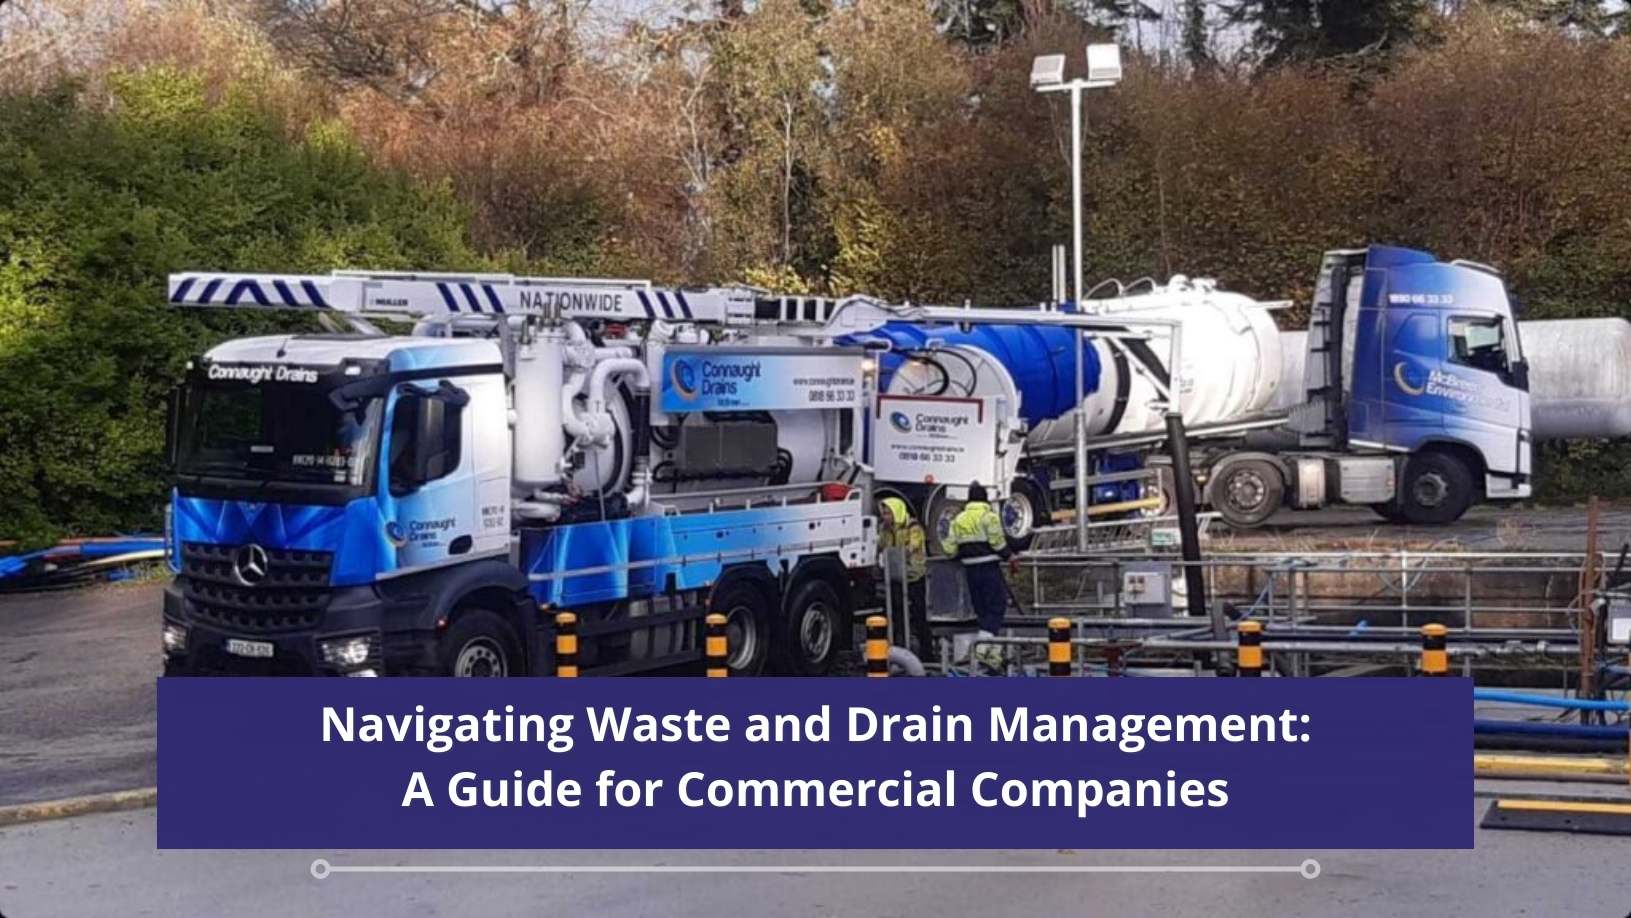 McBreenNavigating Waste and Drain Management A Guide for Commercial Companies (1)